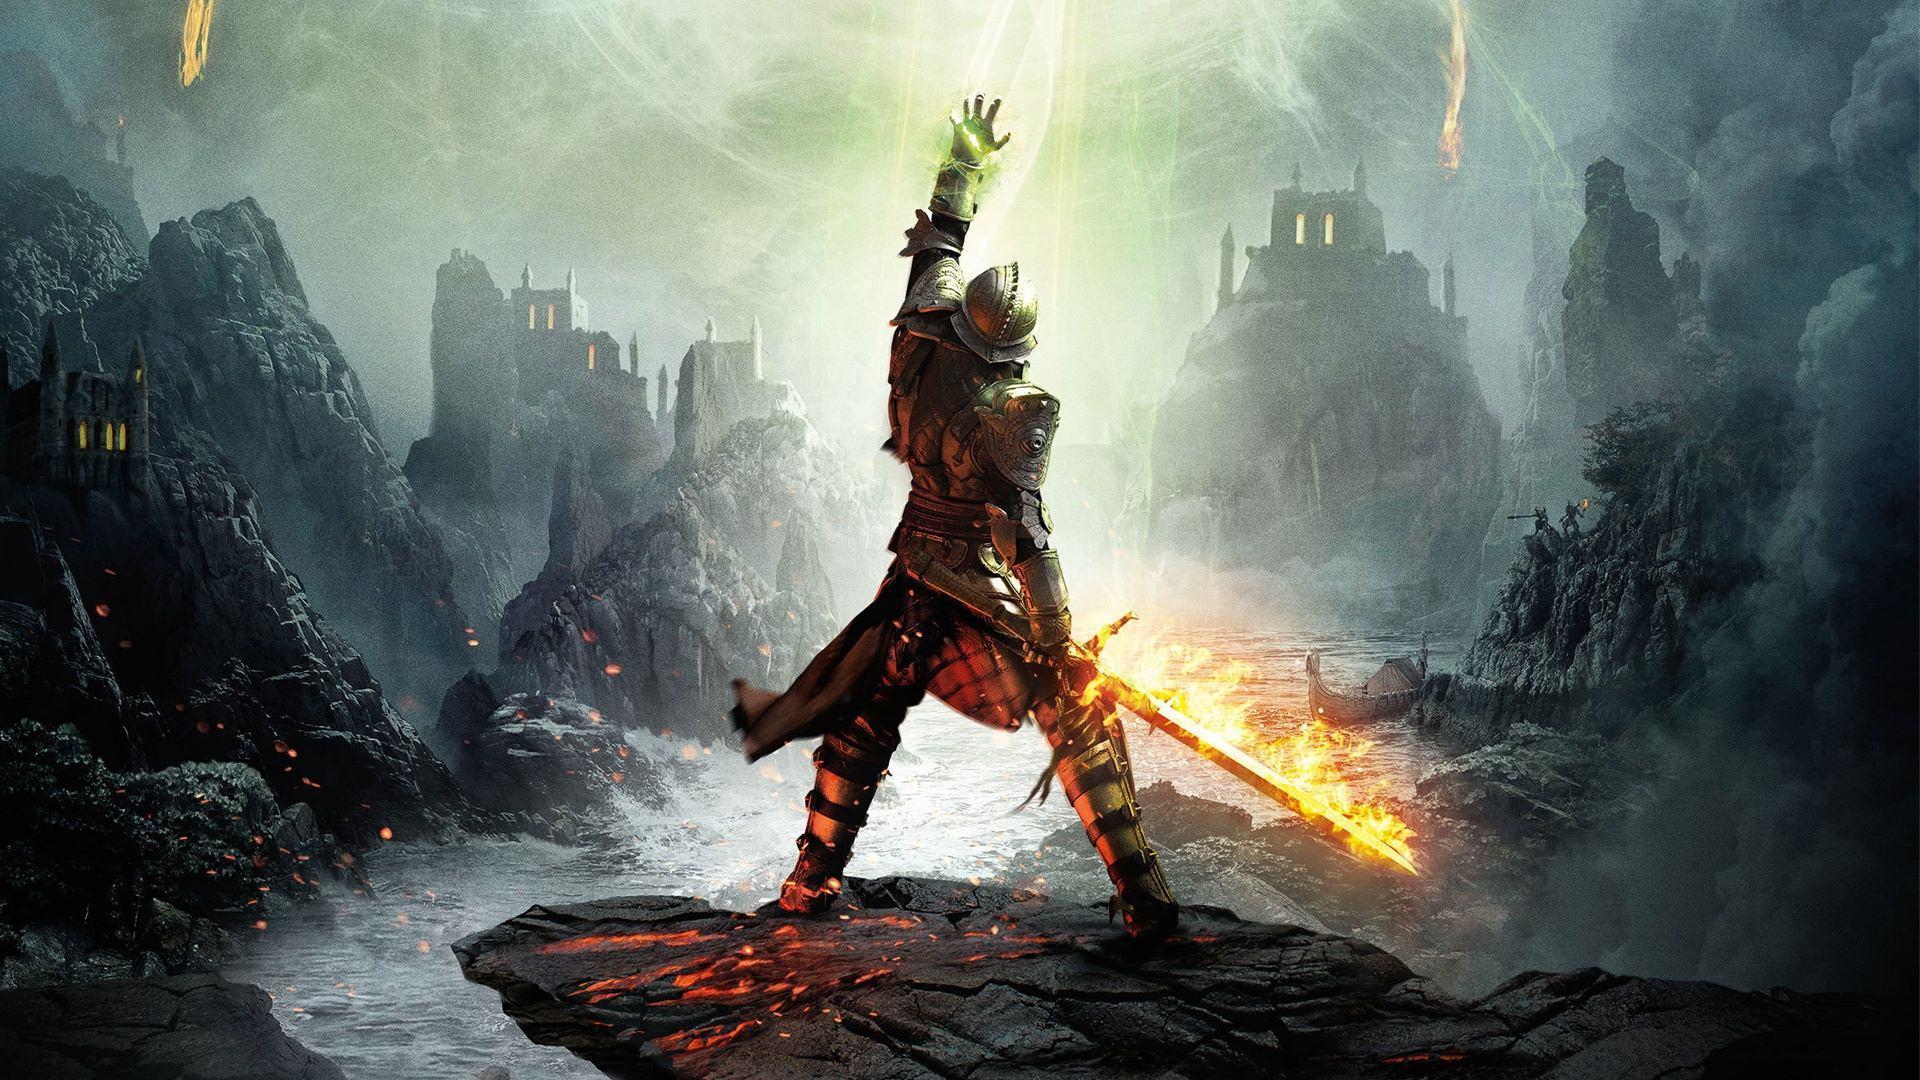 Wallpaper For > Dragon Age Inquisition iPhone Wallpaper